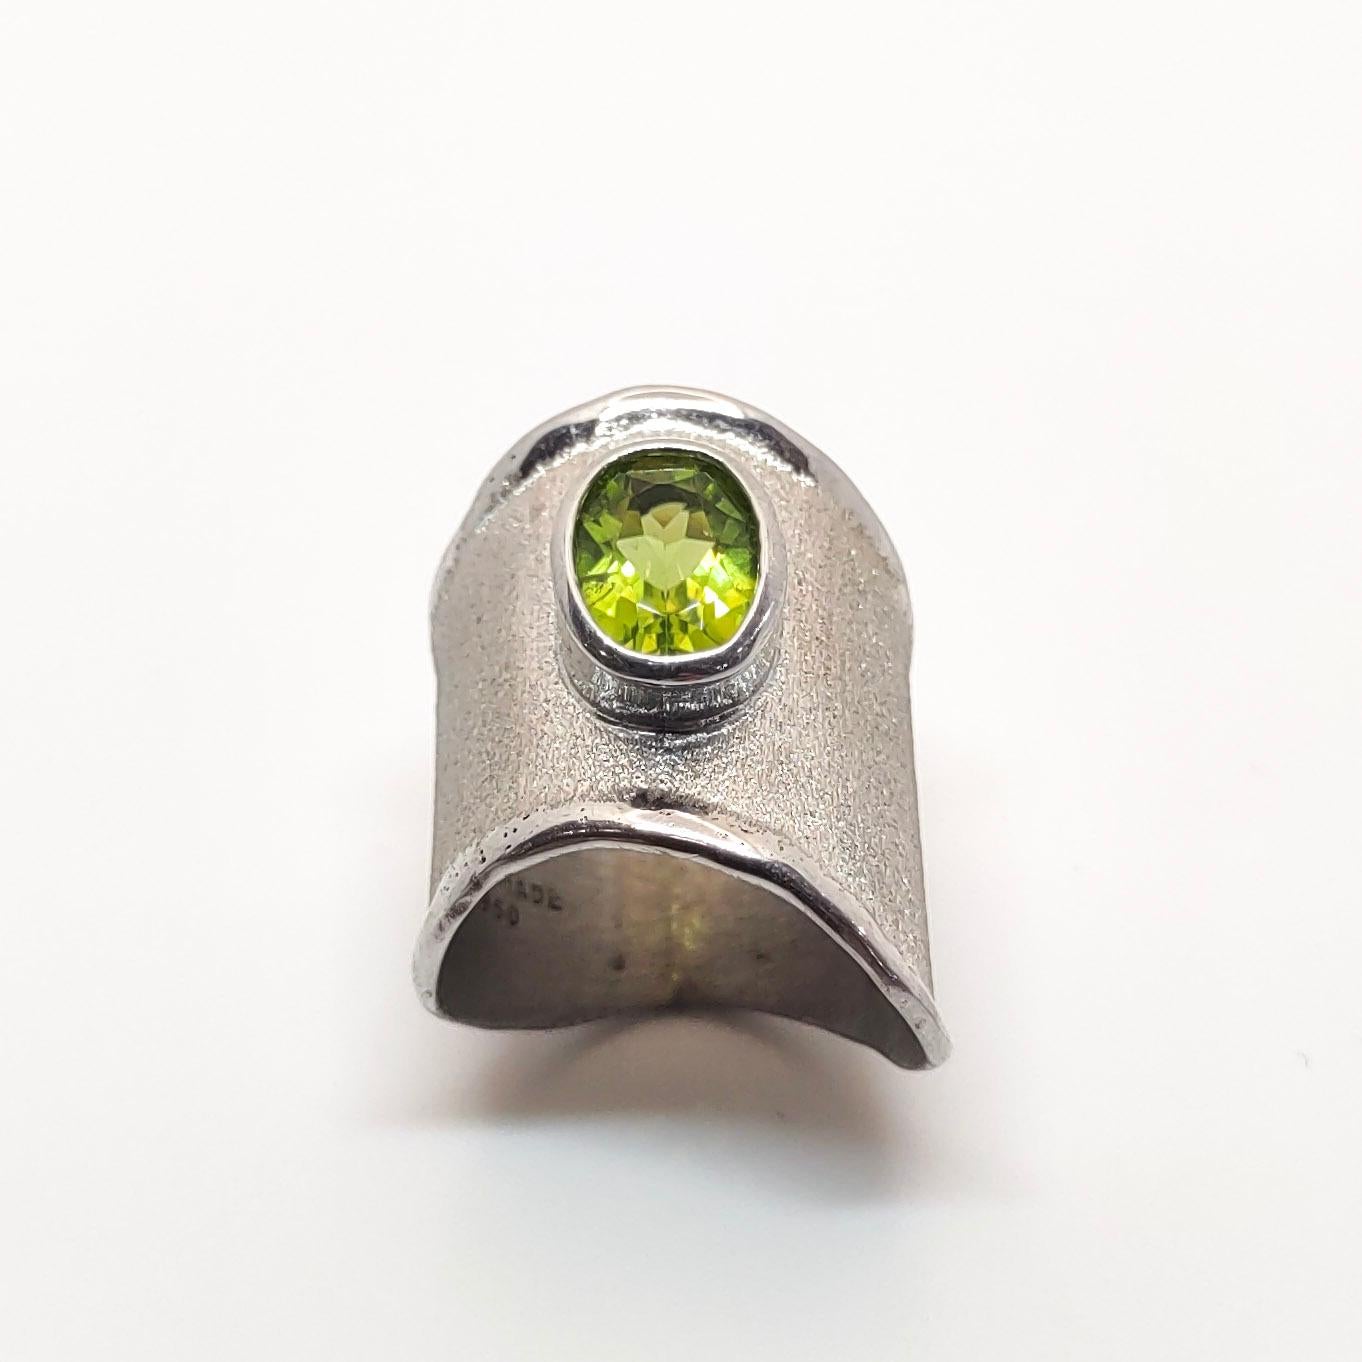 Yianni Creations Peridot Ring in Fine Silver and Palladium In New Condition For Sale In Astoria, NY